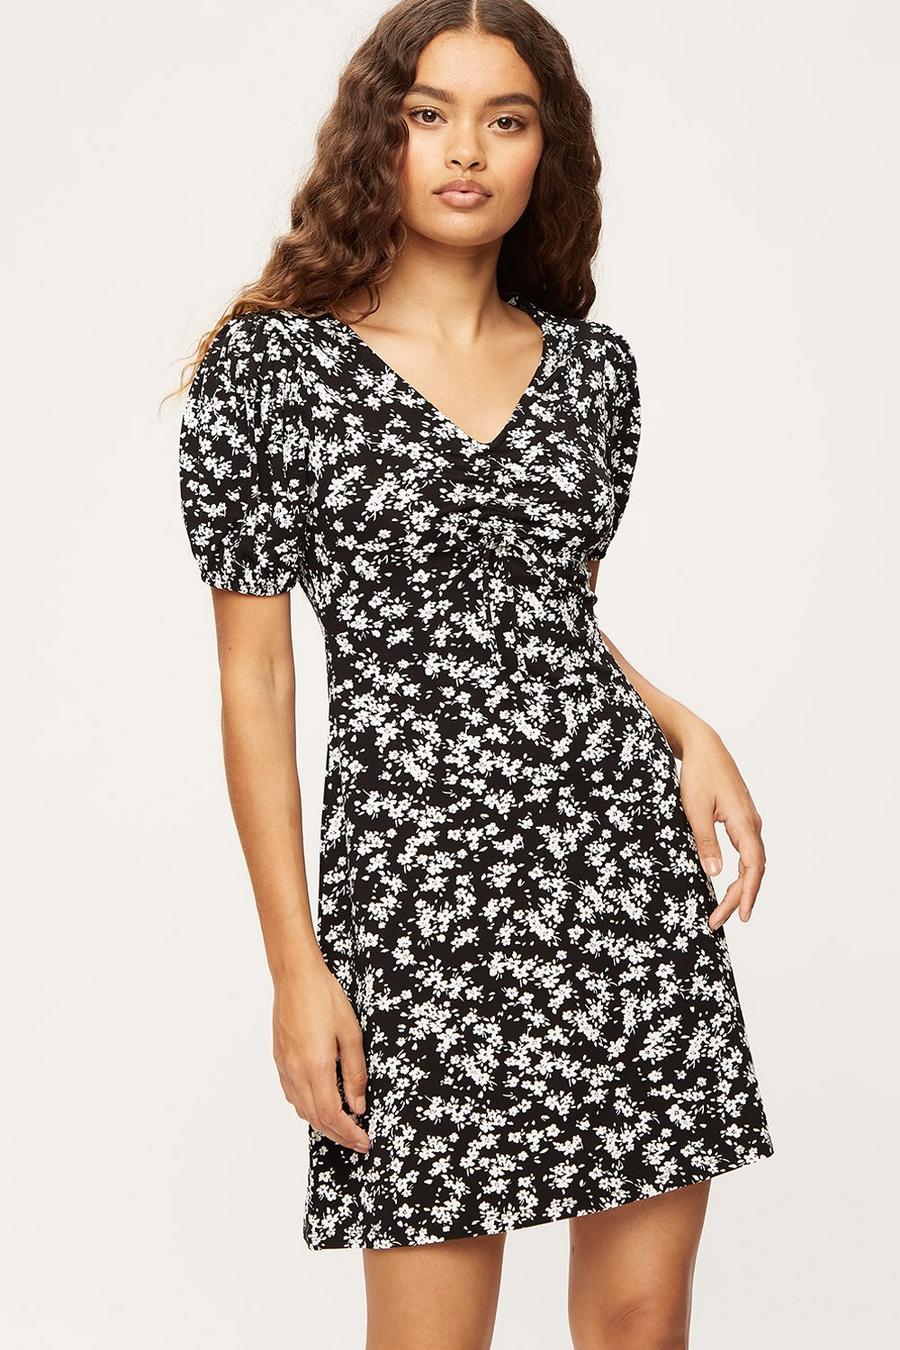 Petite White Floral Ruched Front Dress